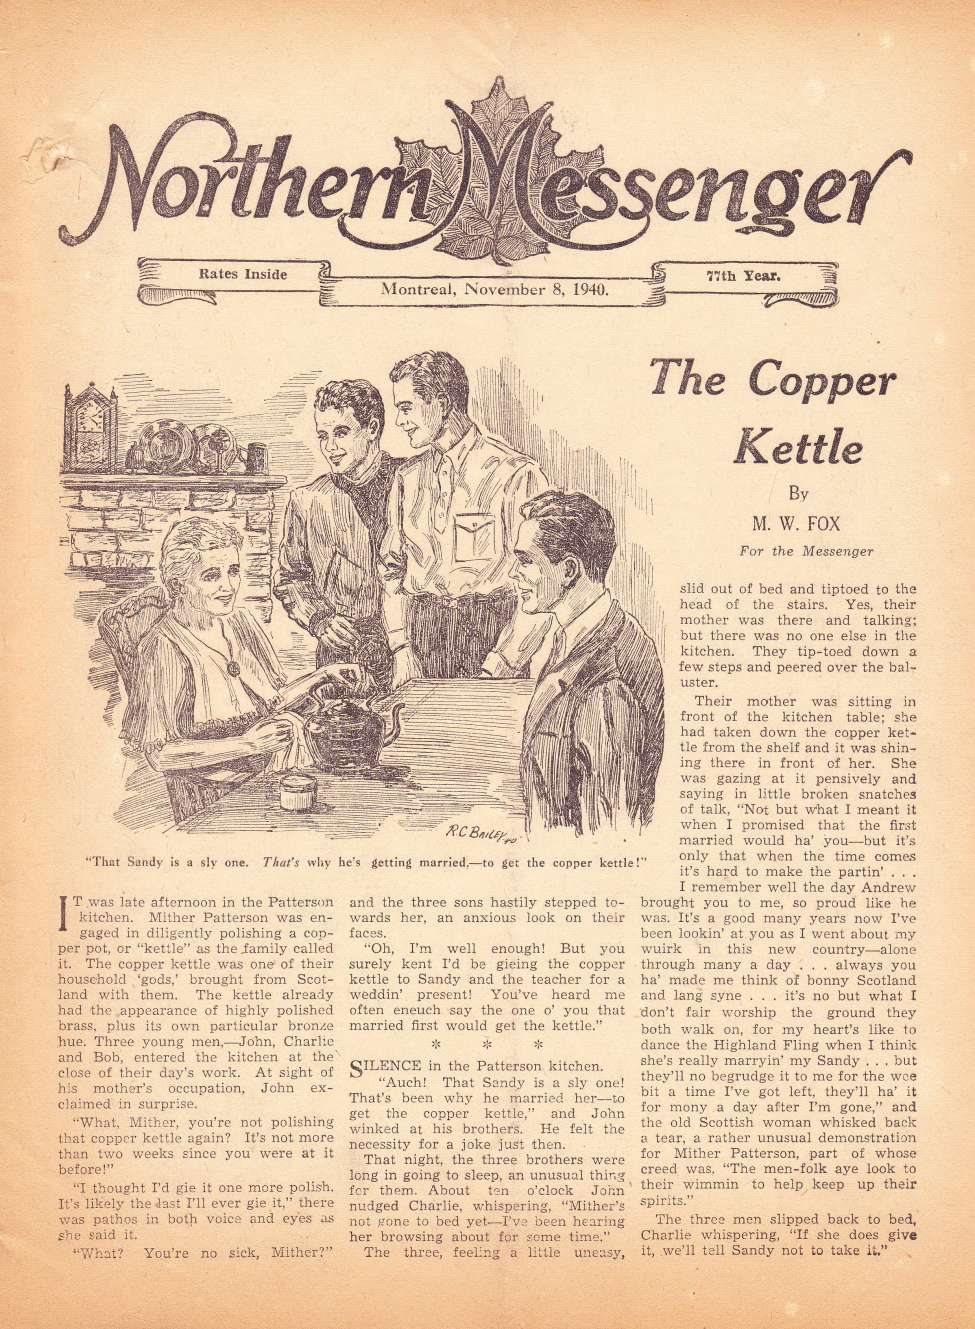 Comic Book Cover For Northern Messenger (1940-11-08)